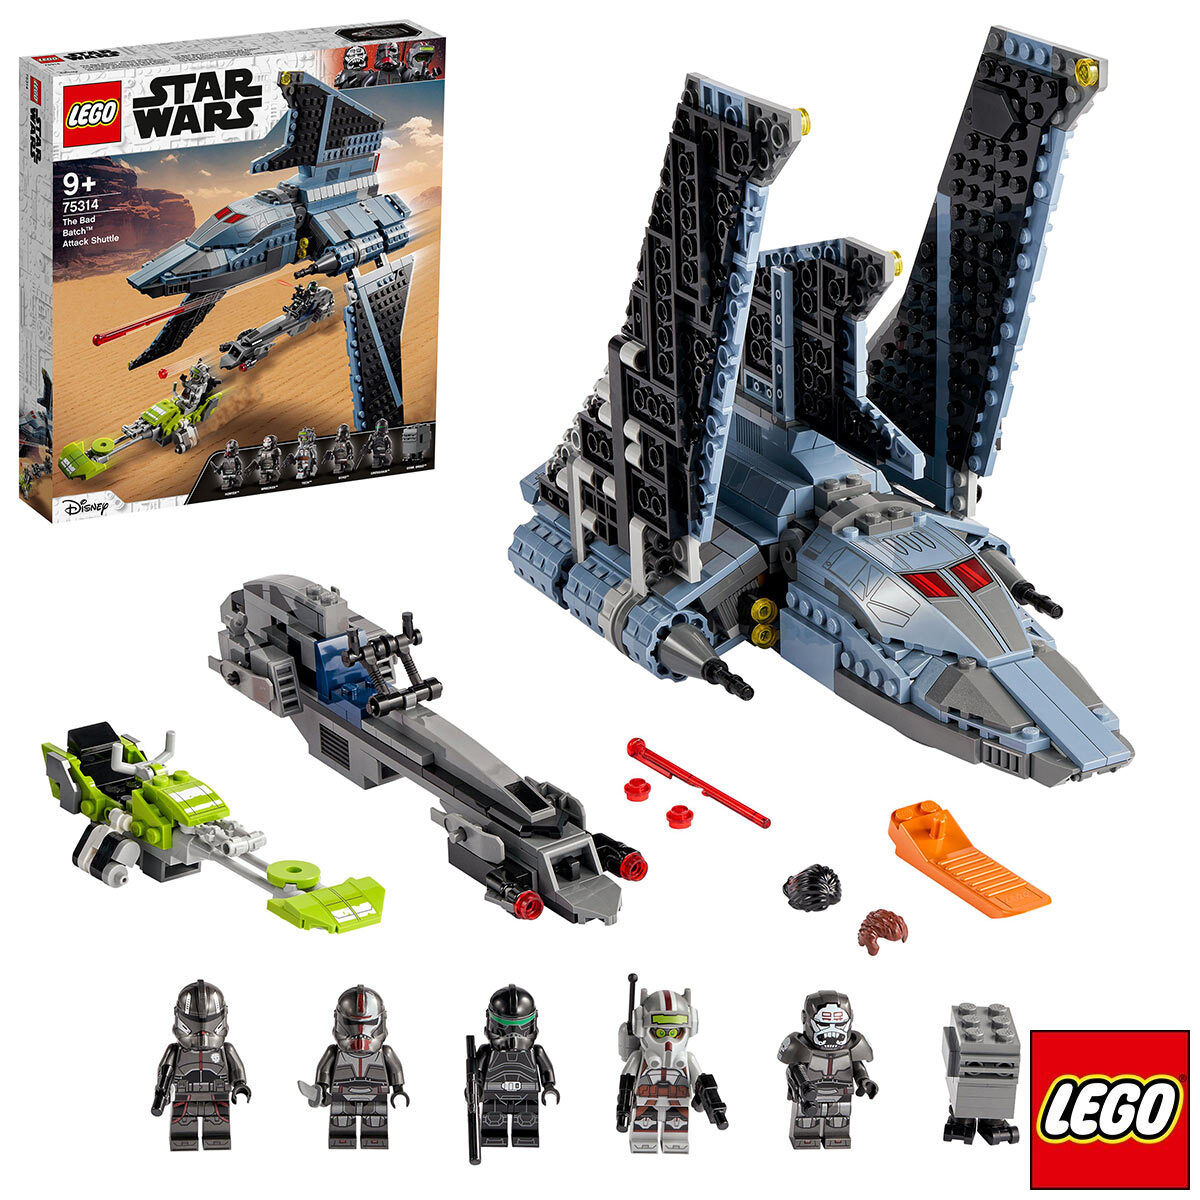 Buy LEGO Star Wars The Bad Batch Attack Shuttle Box and Product Image at Costco.co.uk